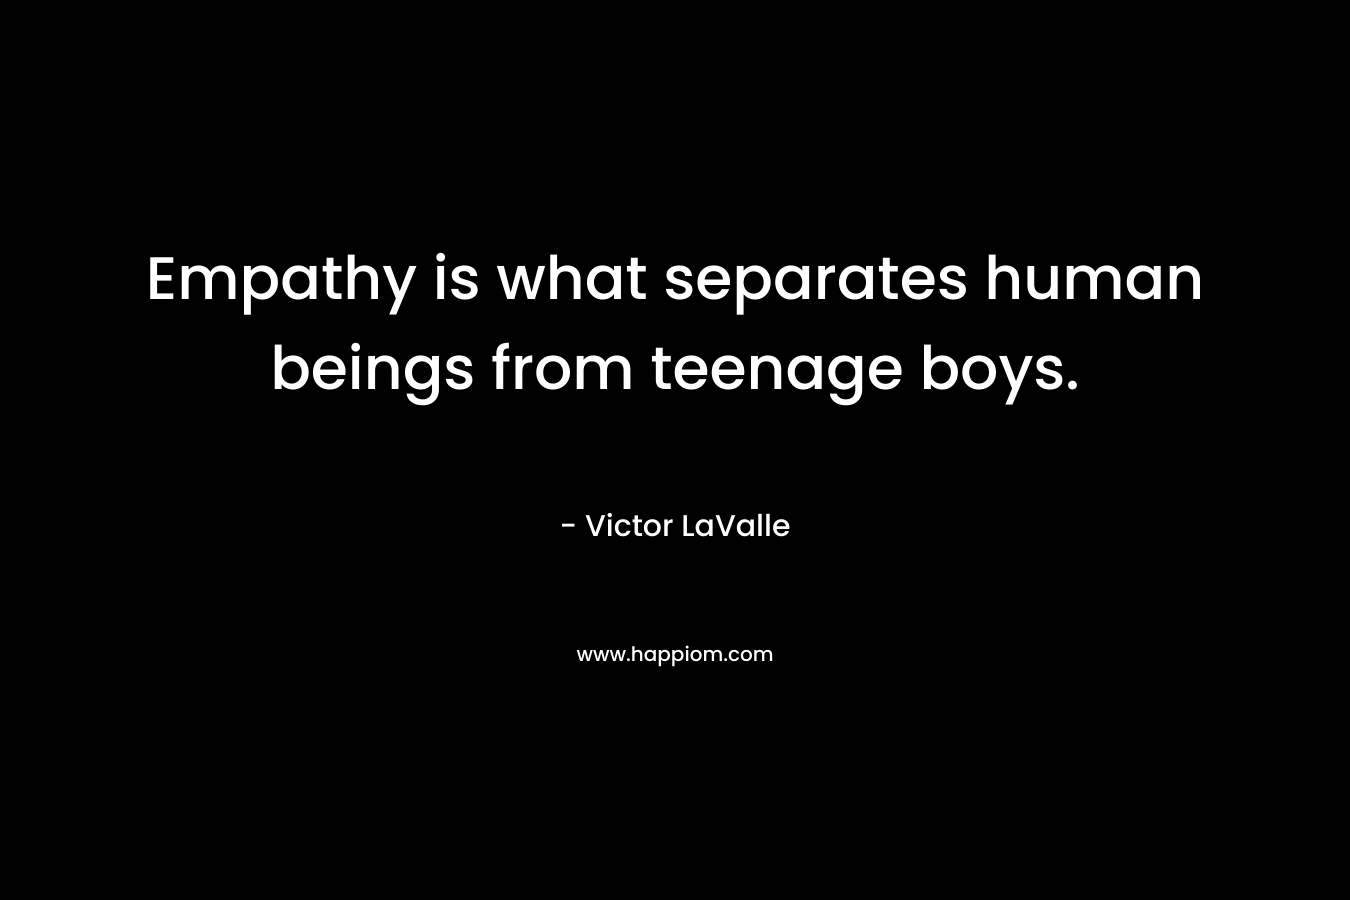 Empathy is what separates human beings from teenage boys. – Victor LaValle